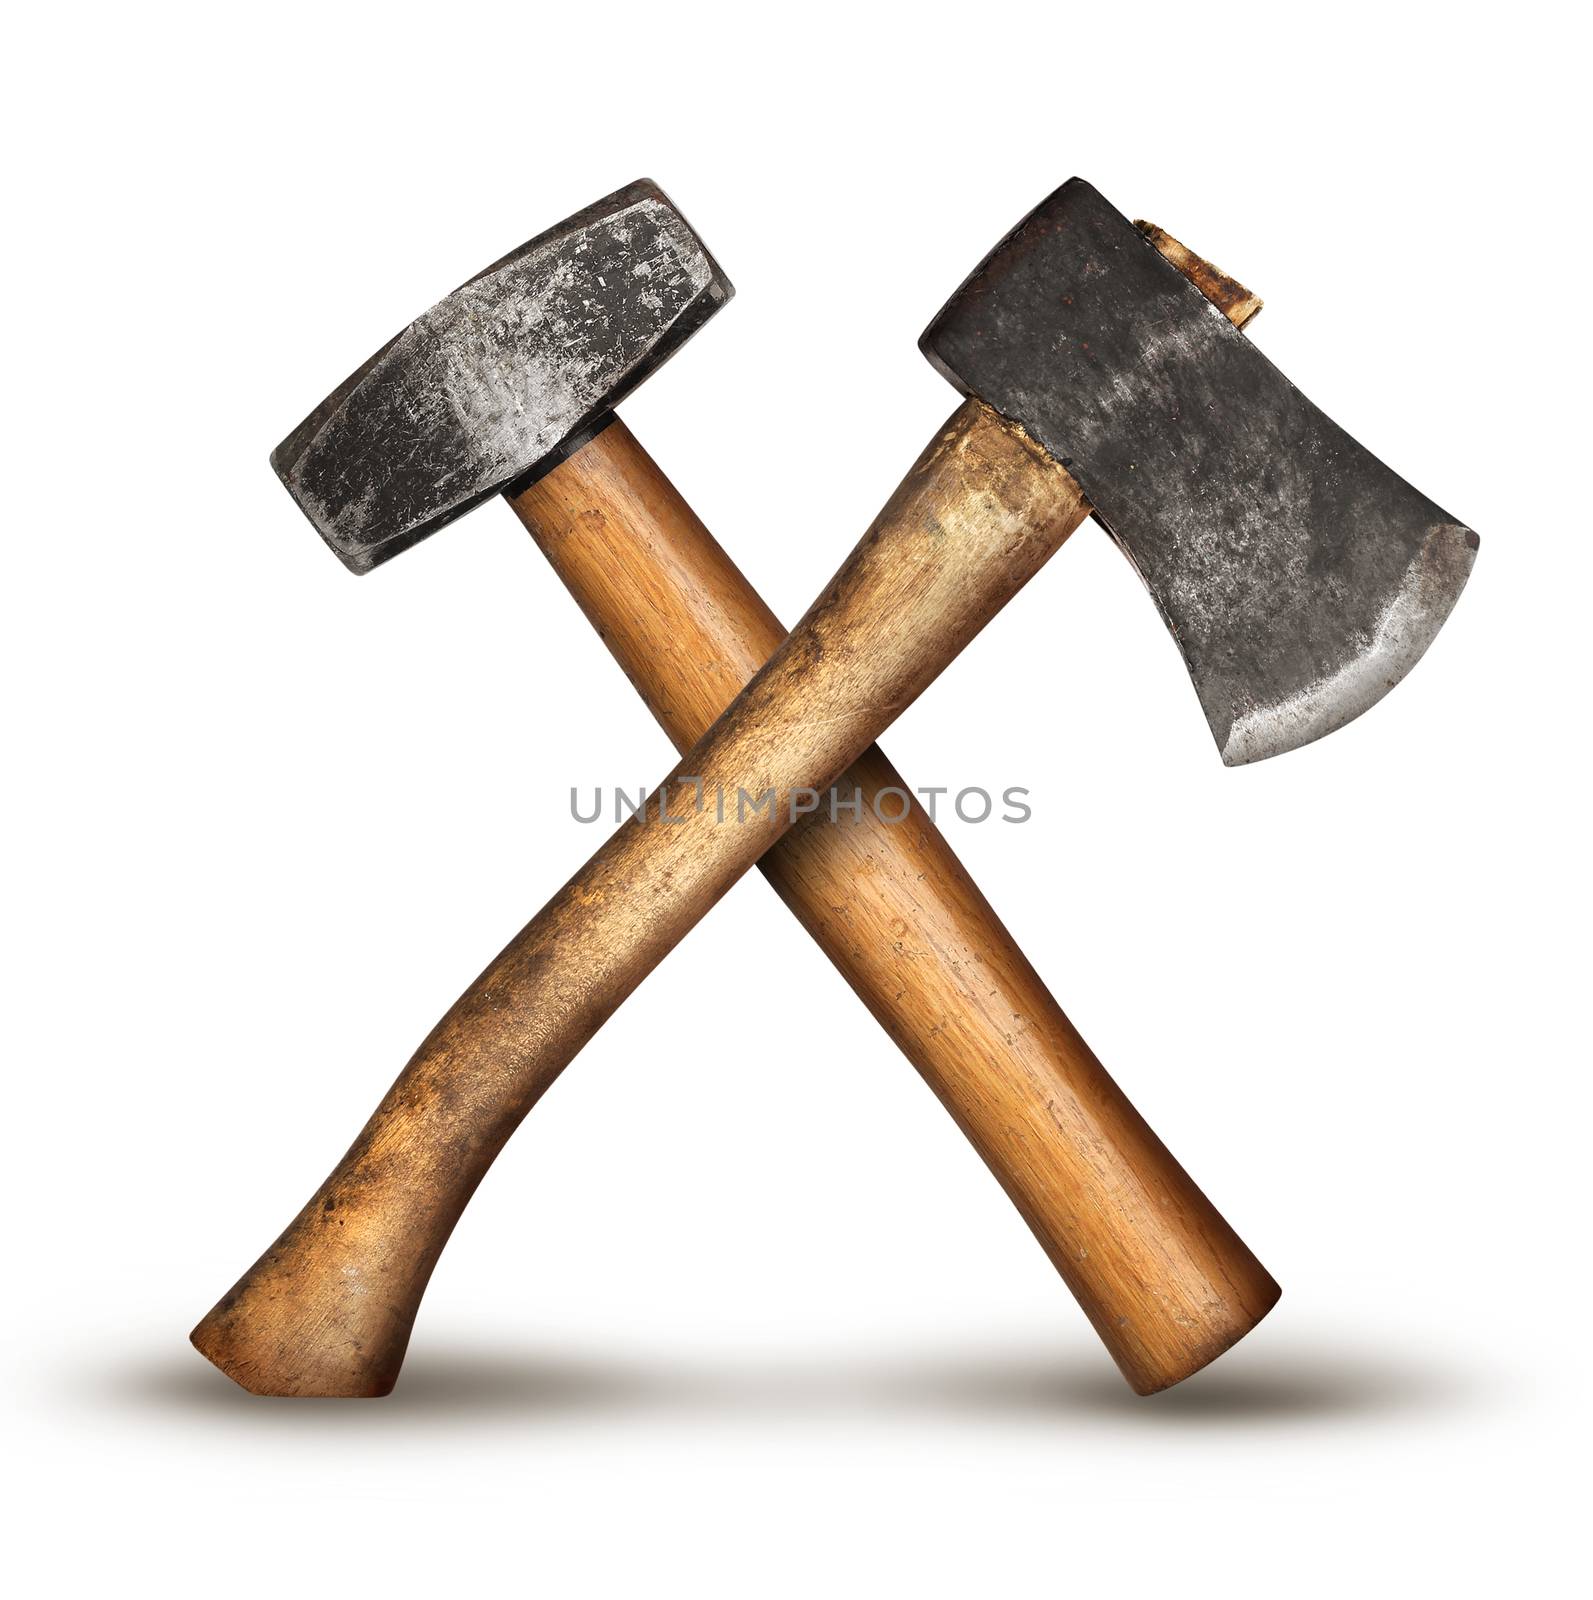 Realistic DIY old hammer and axe tools crossed for get the job done service concept, isolated on white background